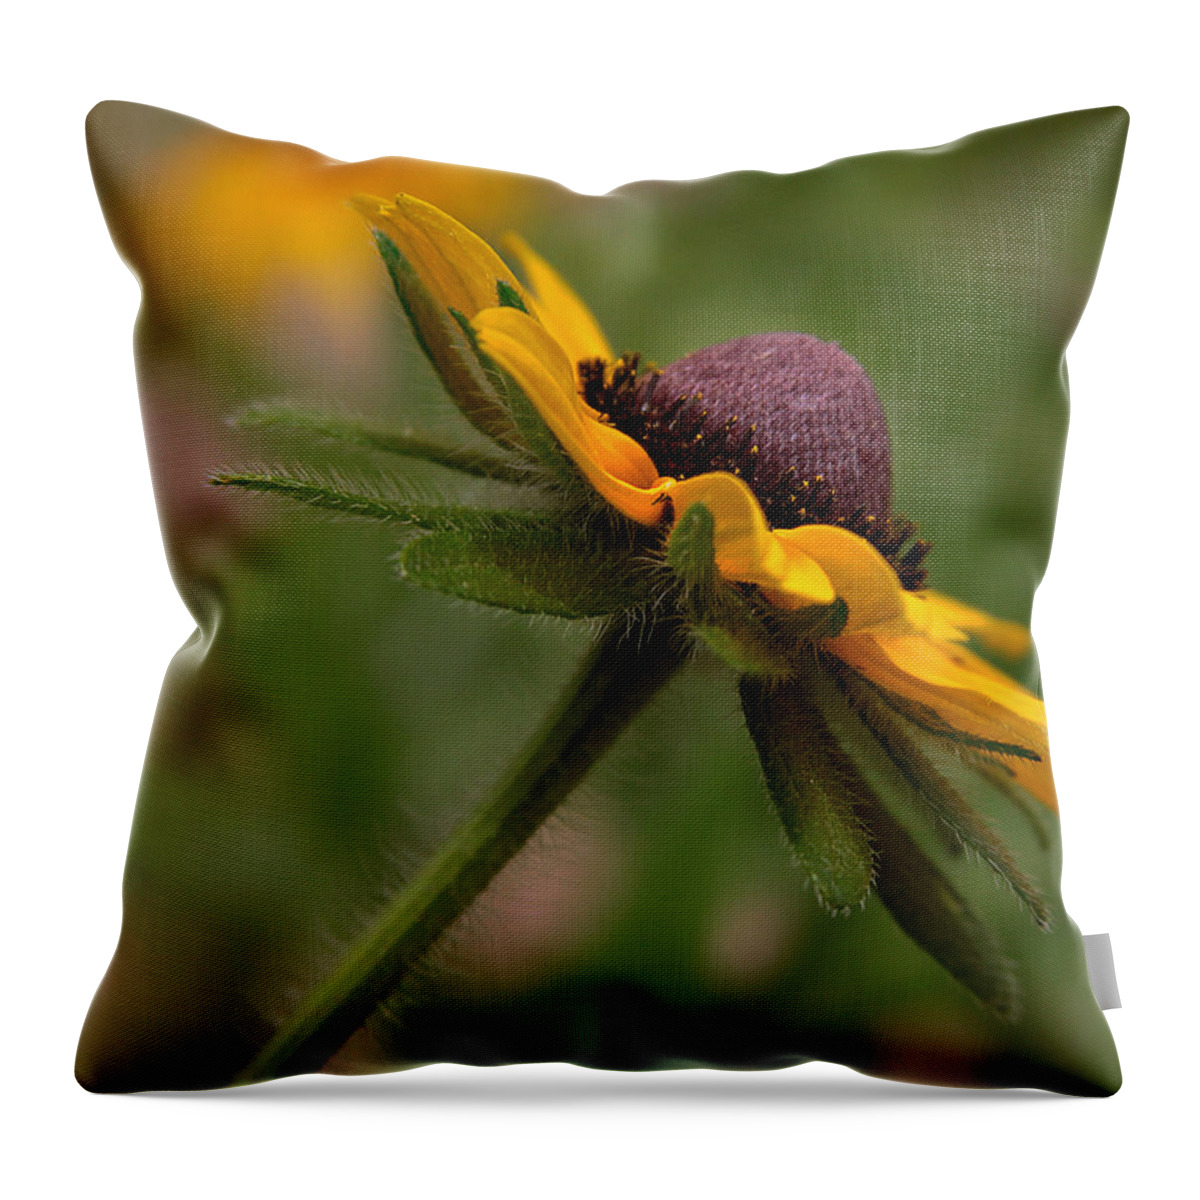  Throw Pillow featuring the photograph Steppin out by Tammy Espino